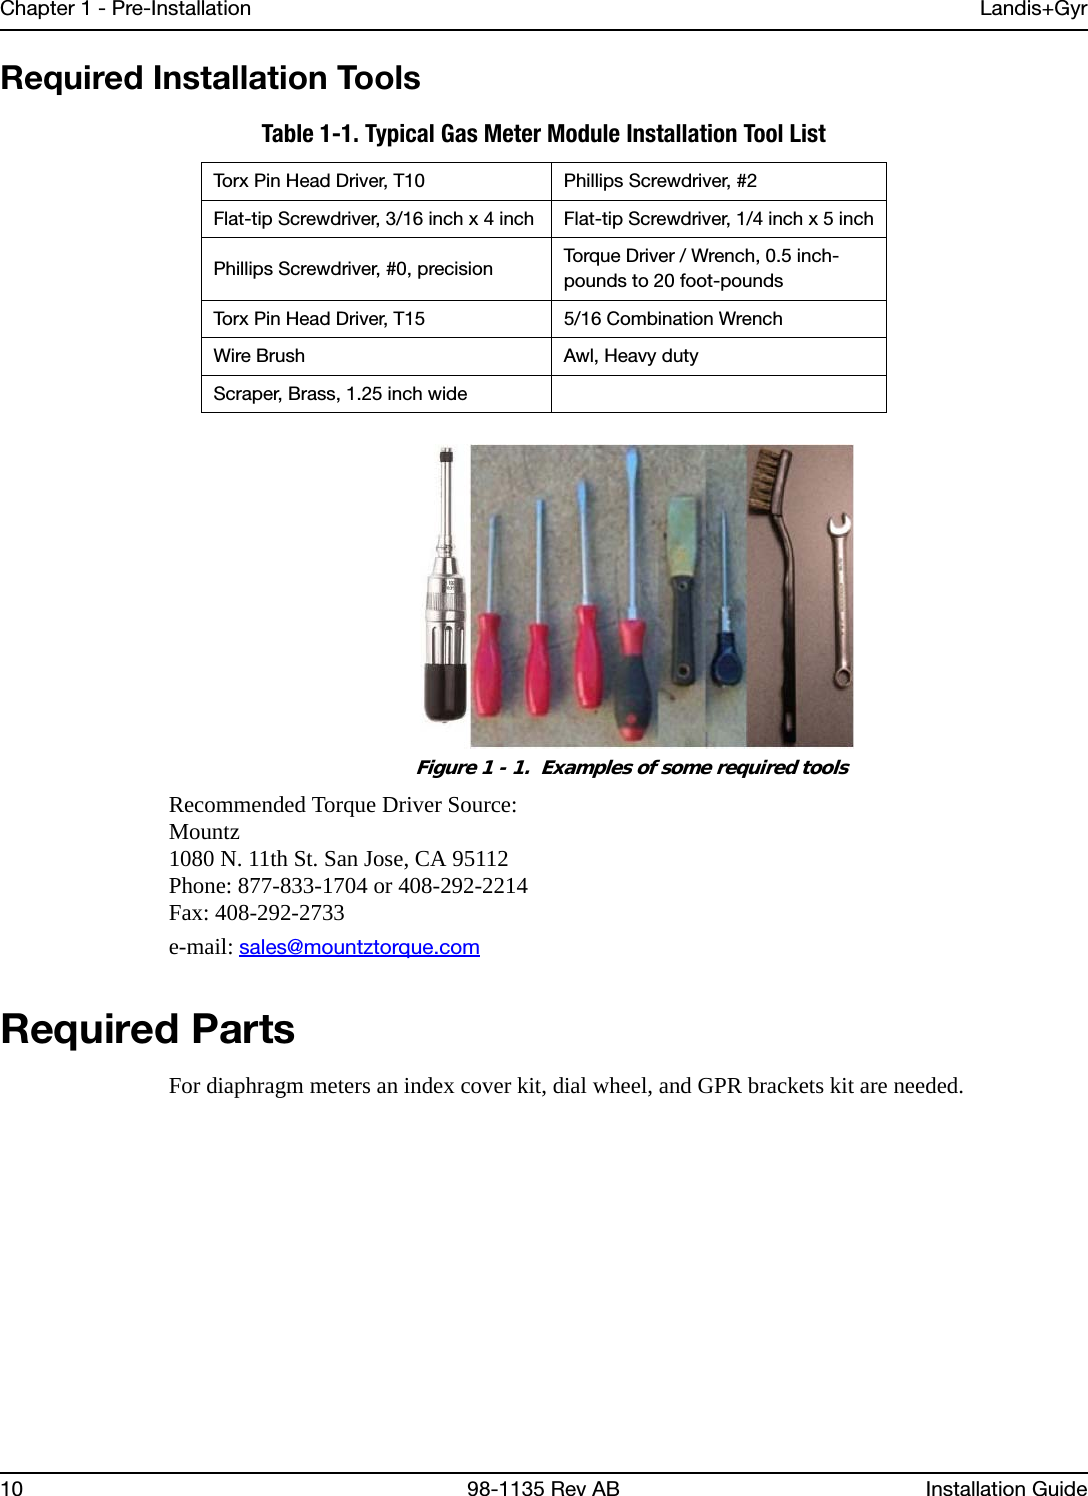 Chapter 1 - Pre-Installation Landis+Gyr10 98-1135 Rev AB Installation GuideRequired Installation Tools Figure 1 - 1.  Examples of some required toolsRecommended Torque Driver Source:Mountz1080 N. 11th St. San Jose, CA 95112Phone: 877-833-1704 or 408-292-2214Fax: 408-292-2733e-mail: sales@mountztorque.comRequired PartsFor diaphragm meters an index cover kit, dial wheel, and GPR brackets kit are needed.Table 1-1. Typical Gas Meter Module Installation Tool ListTorx Pin Head Driver, T10  Phillips Screwdriver, #2 Flat-tip Screwdriver, 3/16 inch x 4 inch Flat-tip Screwdriver, 1/4 inch x 5 inchPhillips Screwdriver, #0, precision Torque Driver / Wrench, 0.5 inch-pounds to 20 foot-poundsTorx Pin Head Driver, T15 5/16 Combination WrenchWire Brush Awl, Heavy dutyScraper, Brass, 1.25 inch wide